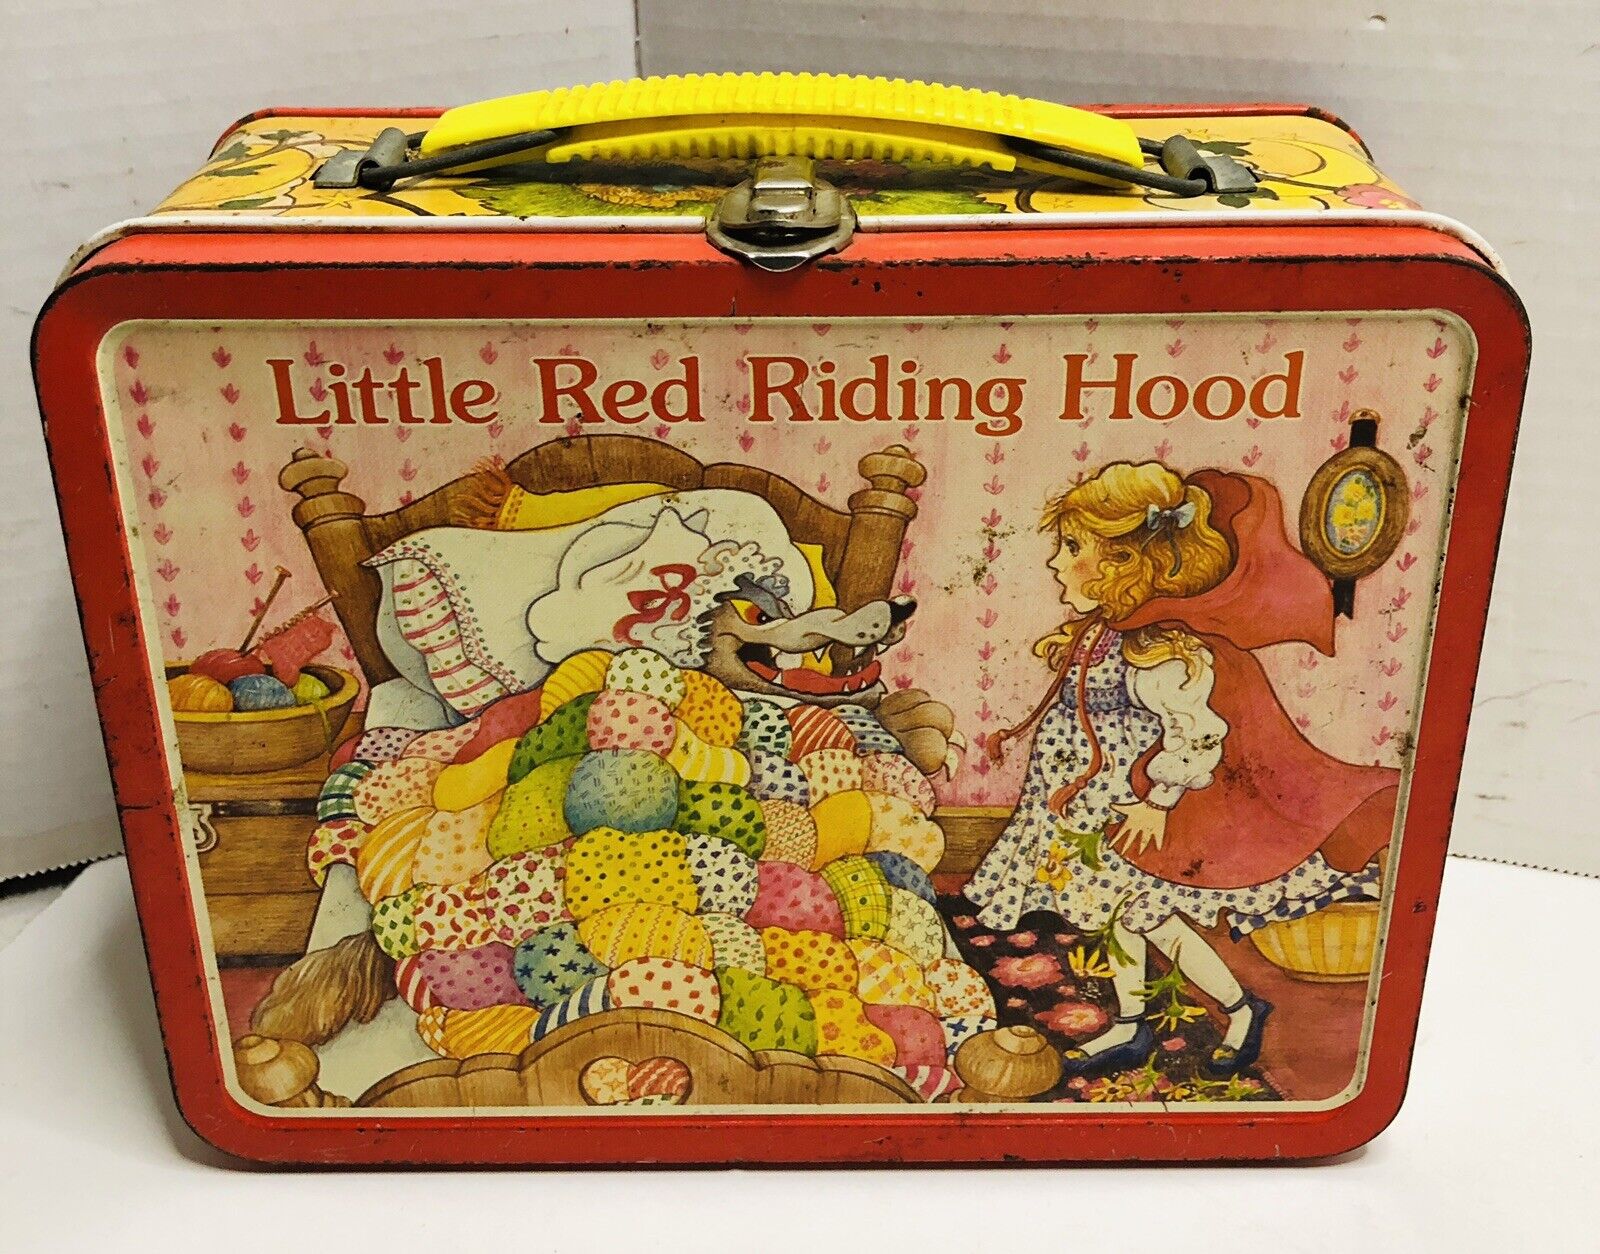 Vintage Ohio Art Little Red Riding Hood Metal Lunchbox *No Thermos